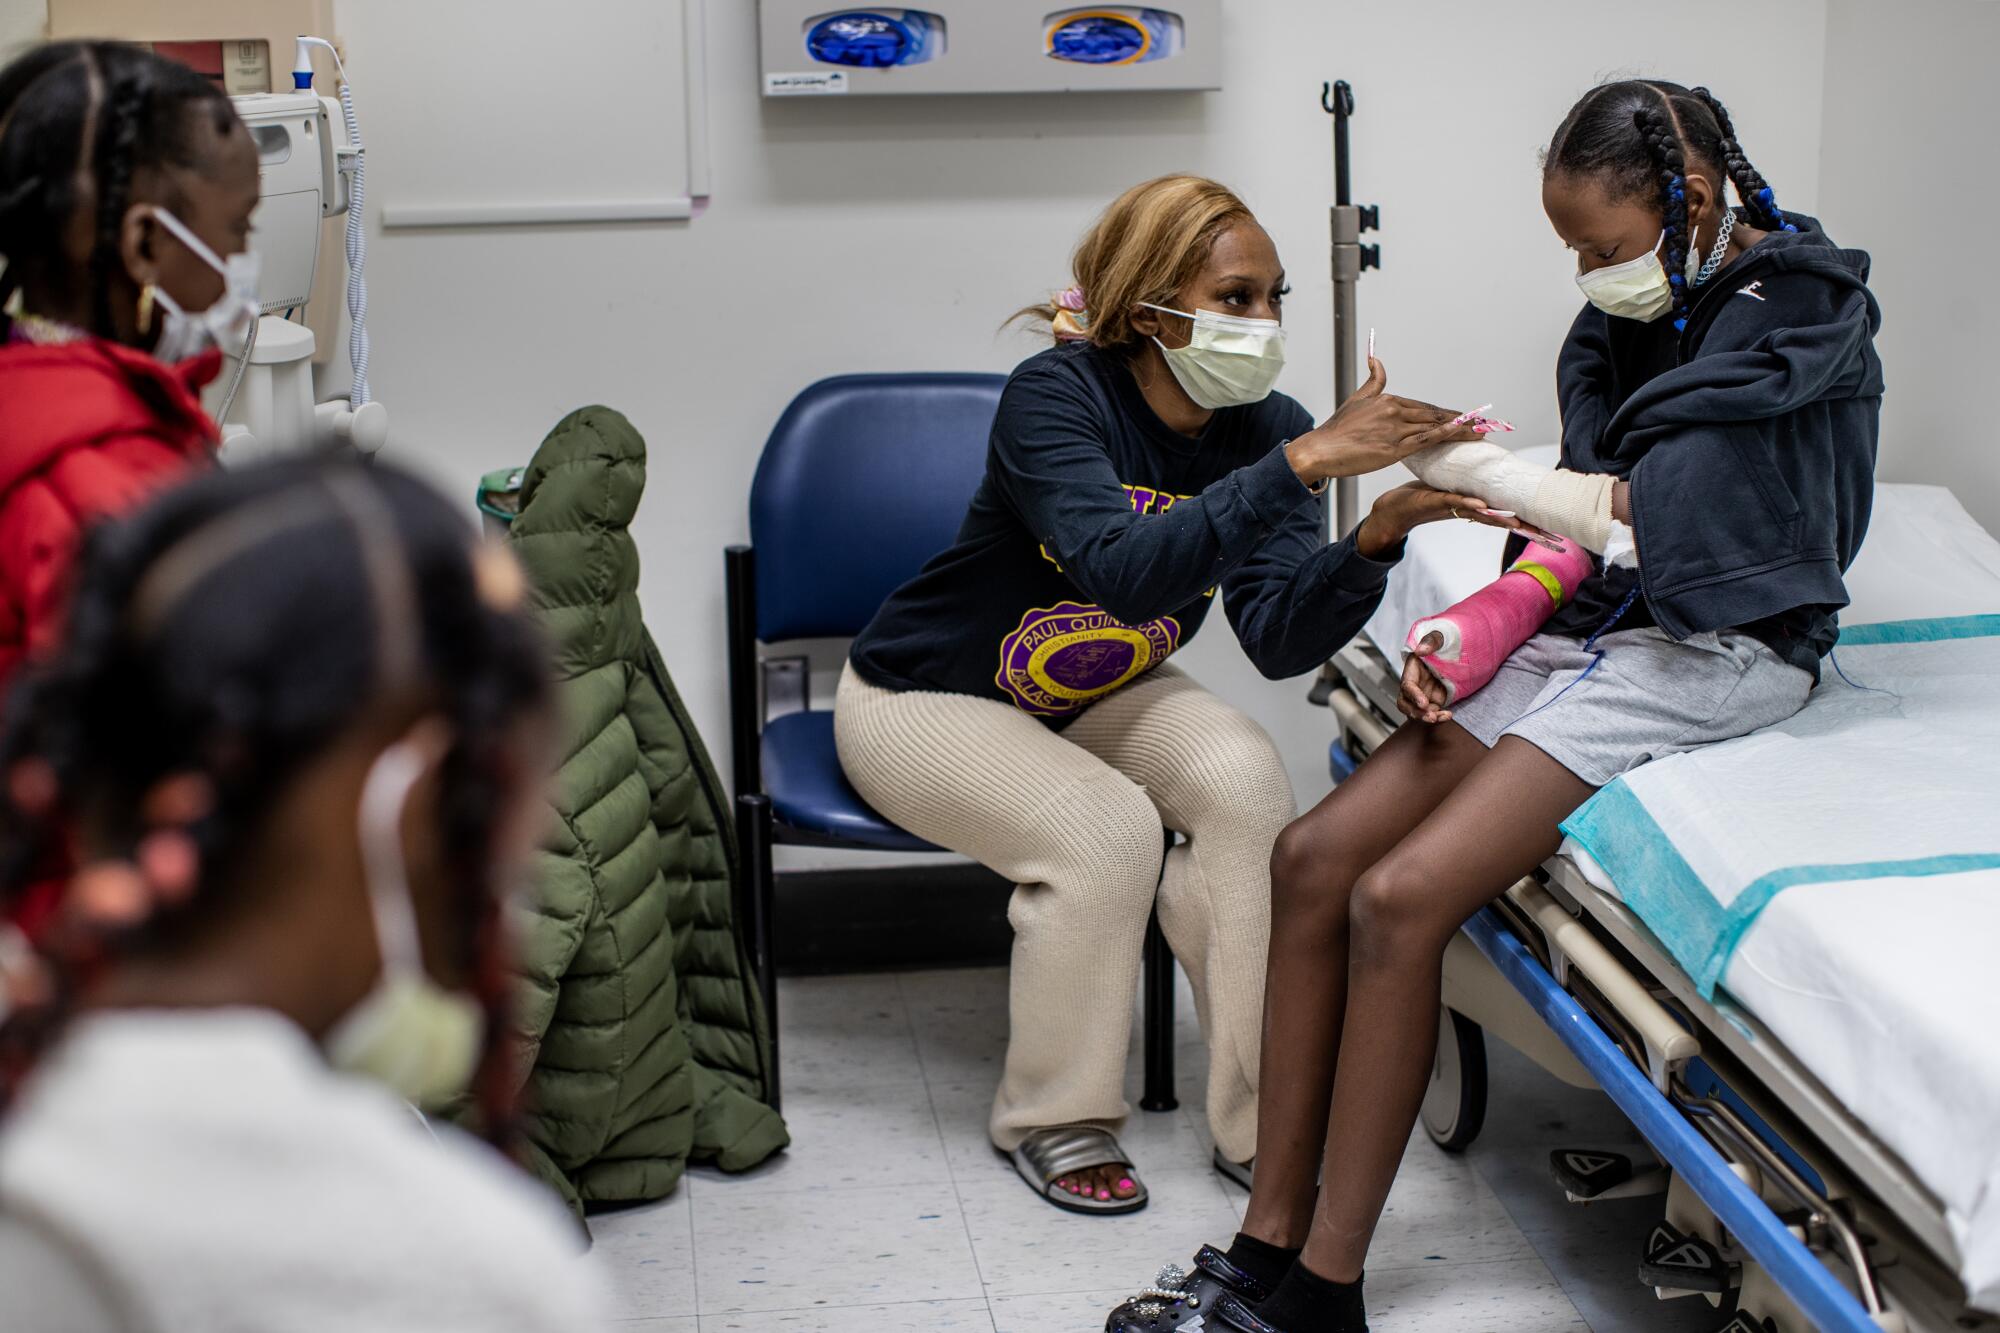 Staneisha Matthews rubs her daughter La'Veyah Mosley's, 12, left hand before a doctors appointment 